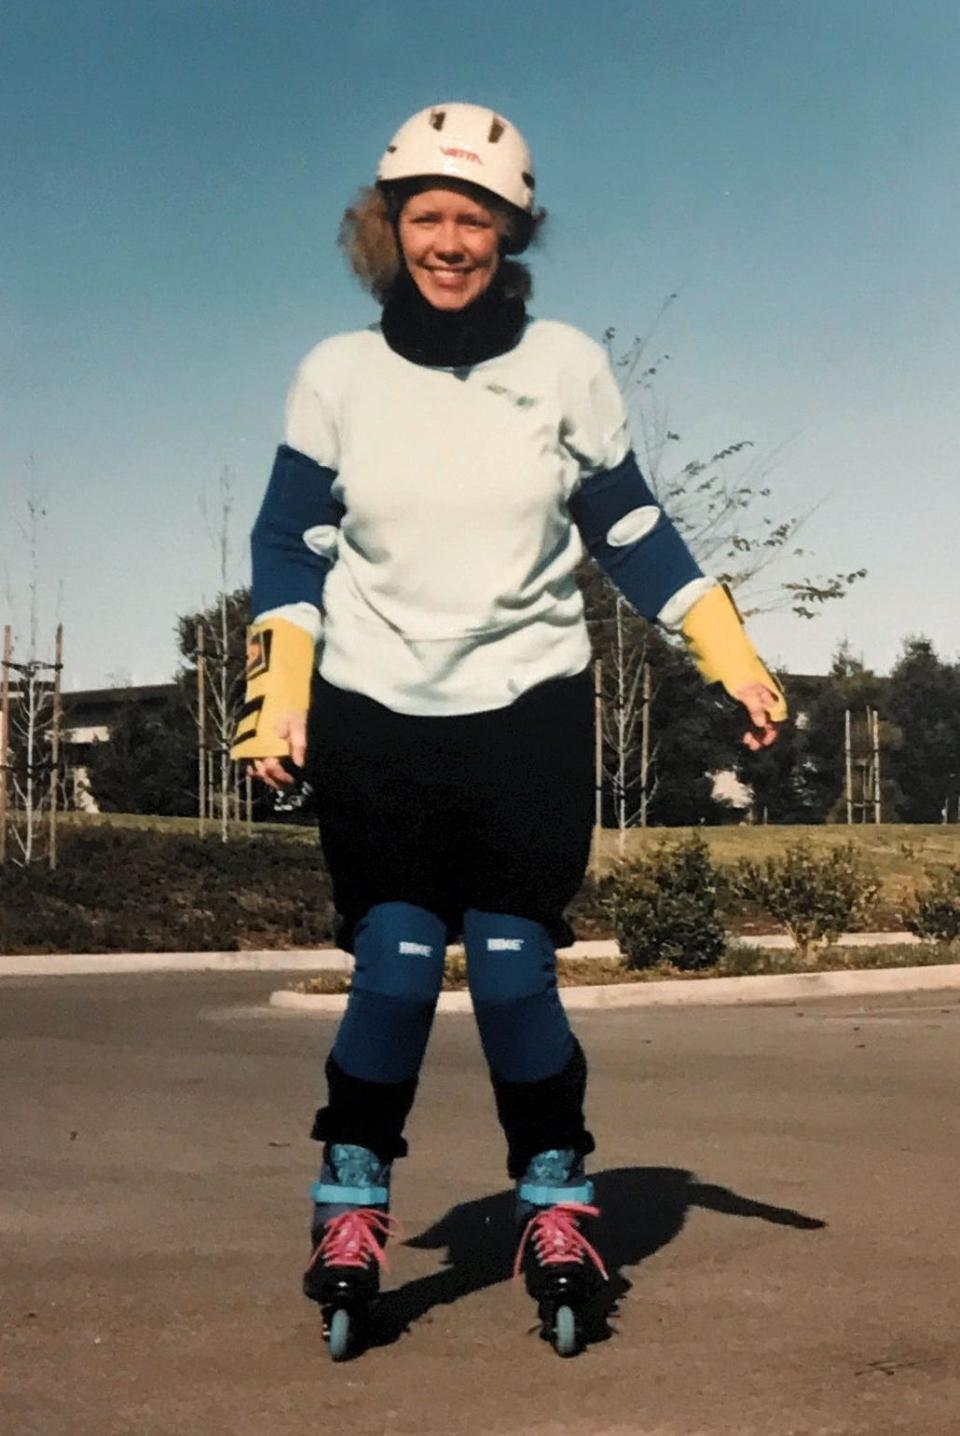 Louisa Rogers on inline skates in her 40s.